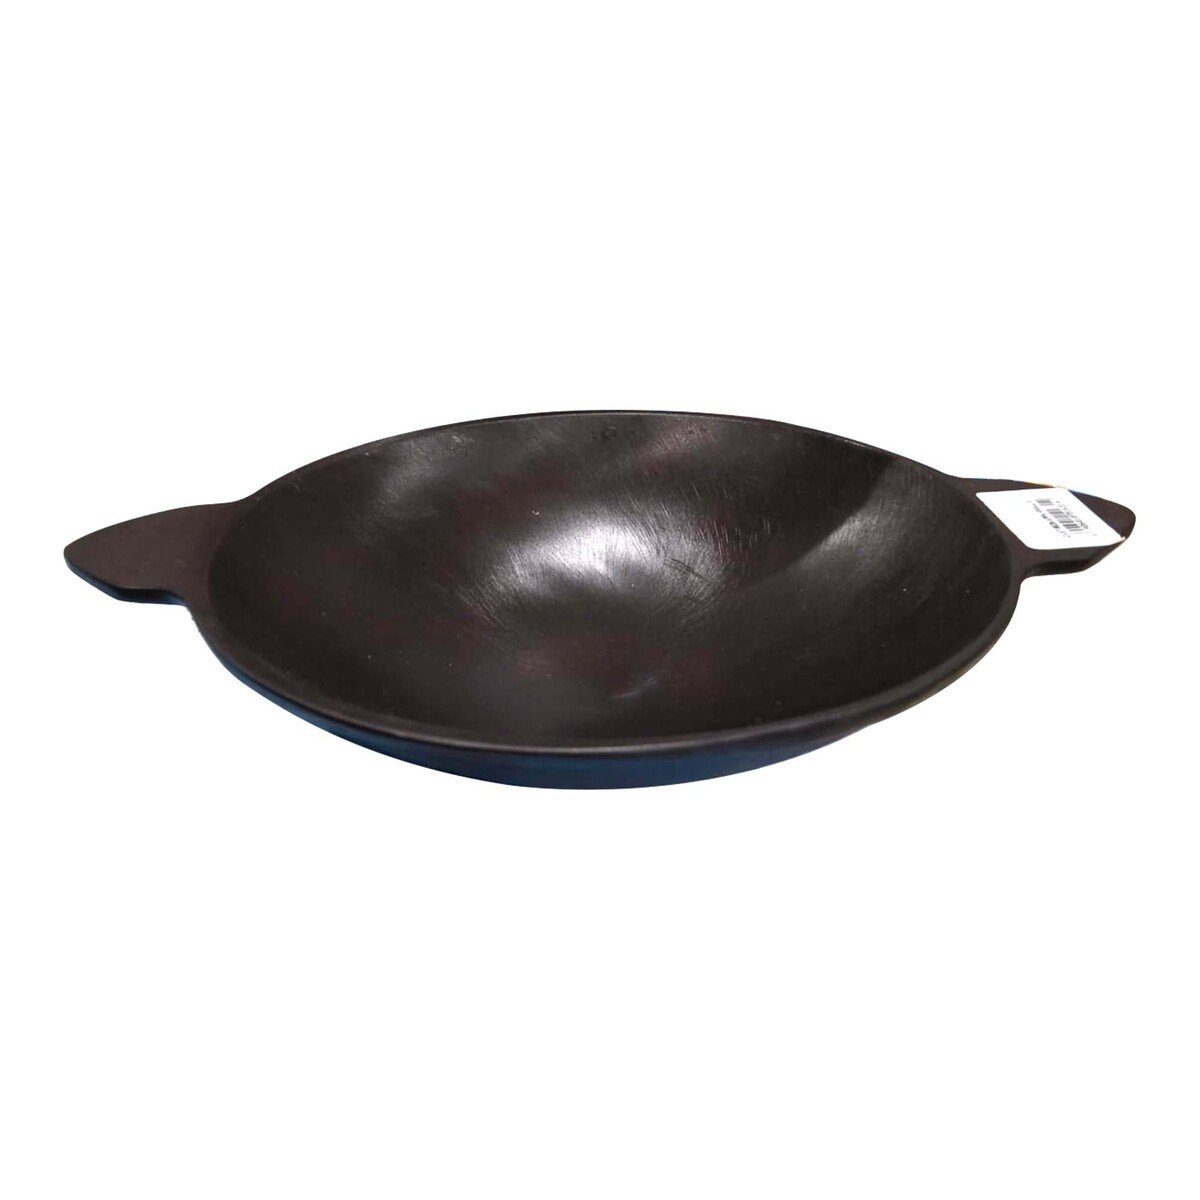 Surya Cast Iron Appam Pan, 8 inches, SCIAPK8